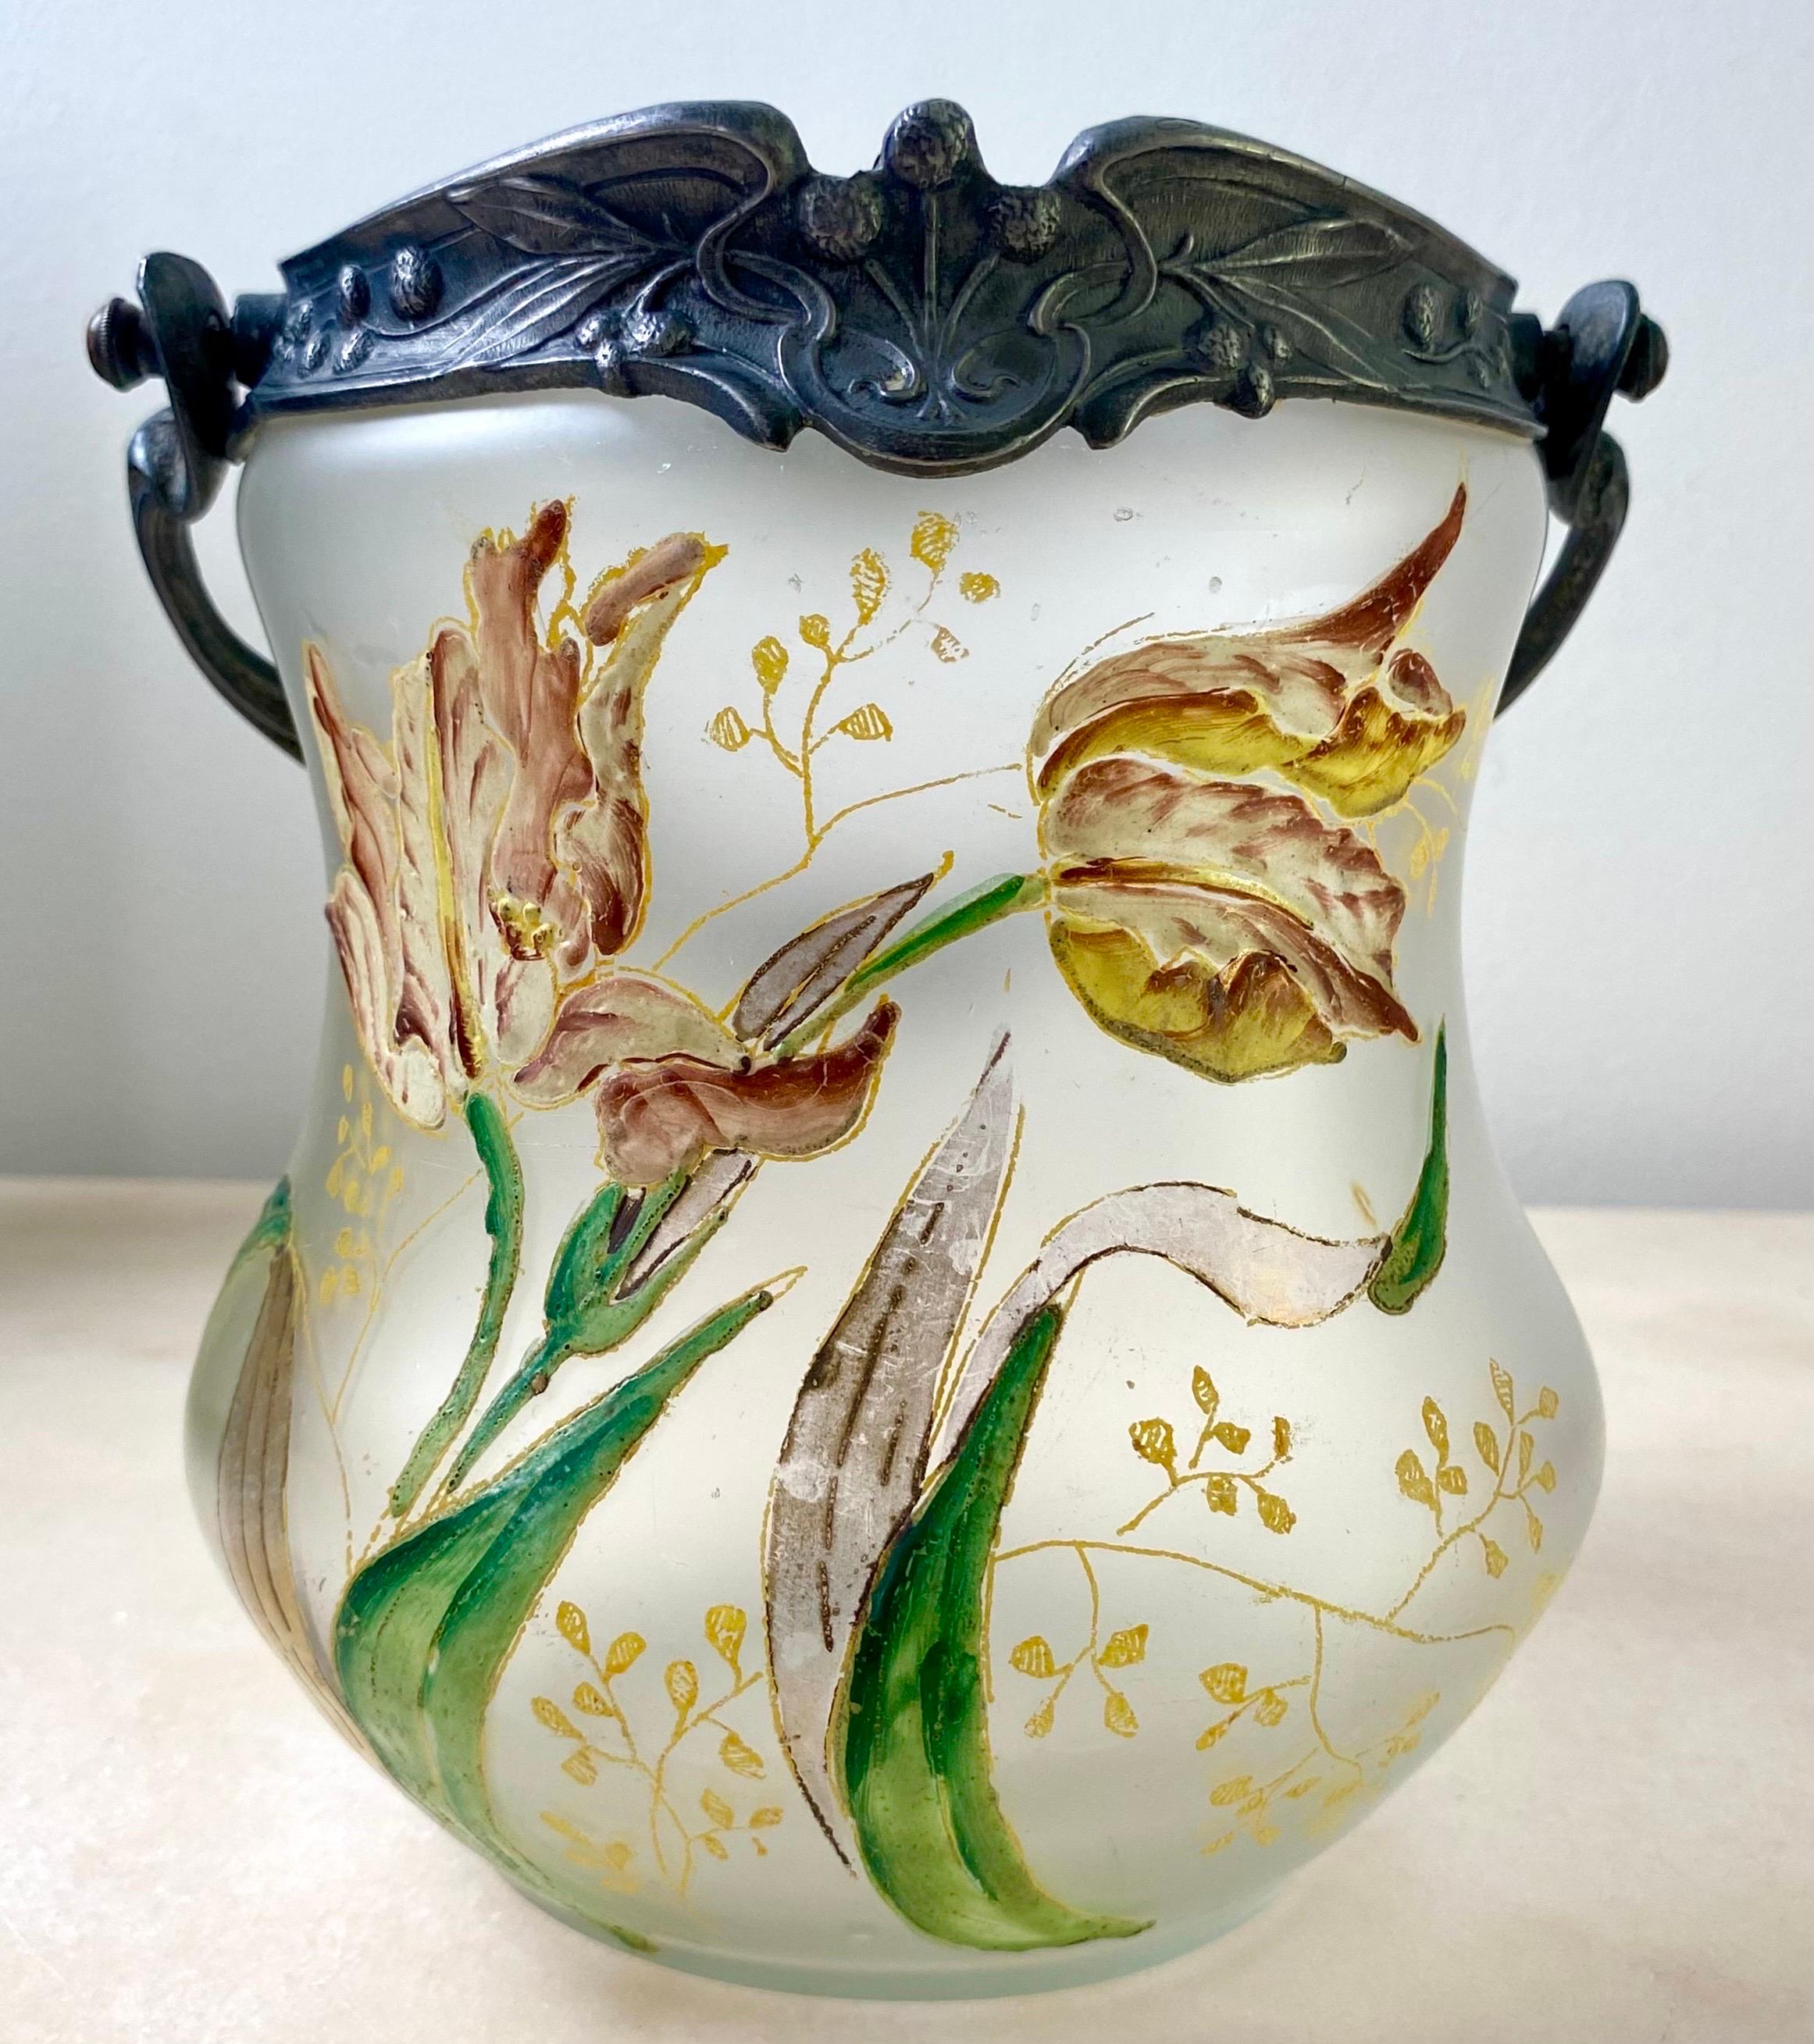 Superb bucket, pot, Etruscan-shaped vase, from the Art Nouveau period. Circa 1880.
French work in the style of the famous Legras glass and crystal workshops.

This Pretty Cookie Bucket is made of beautifully crafted glass, decorated with colorful